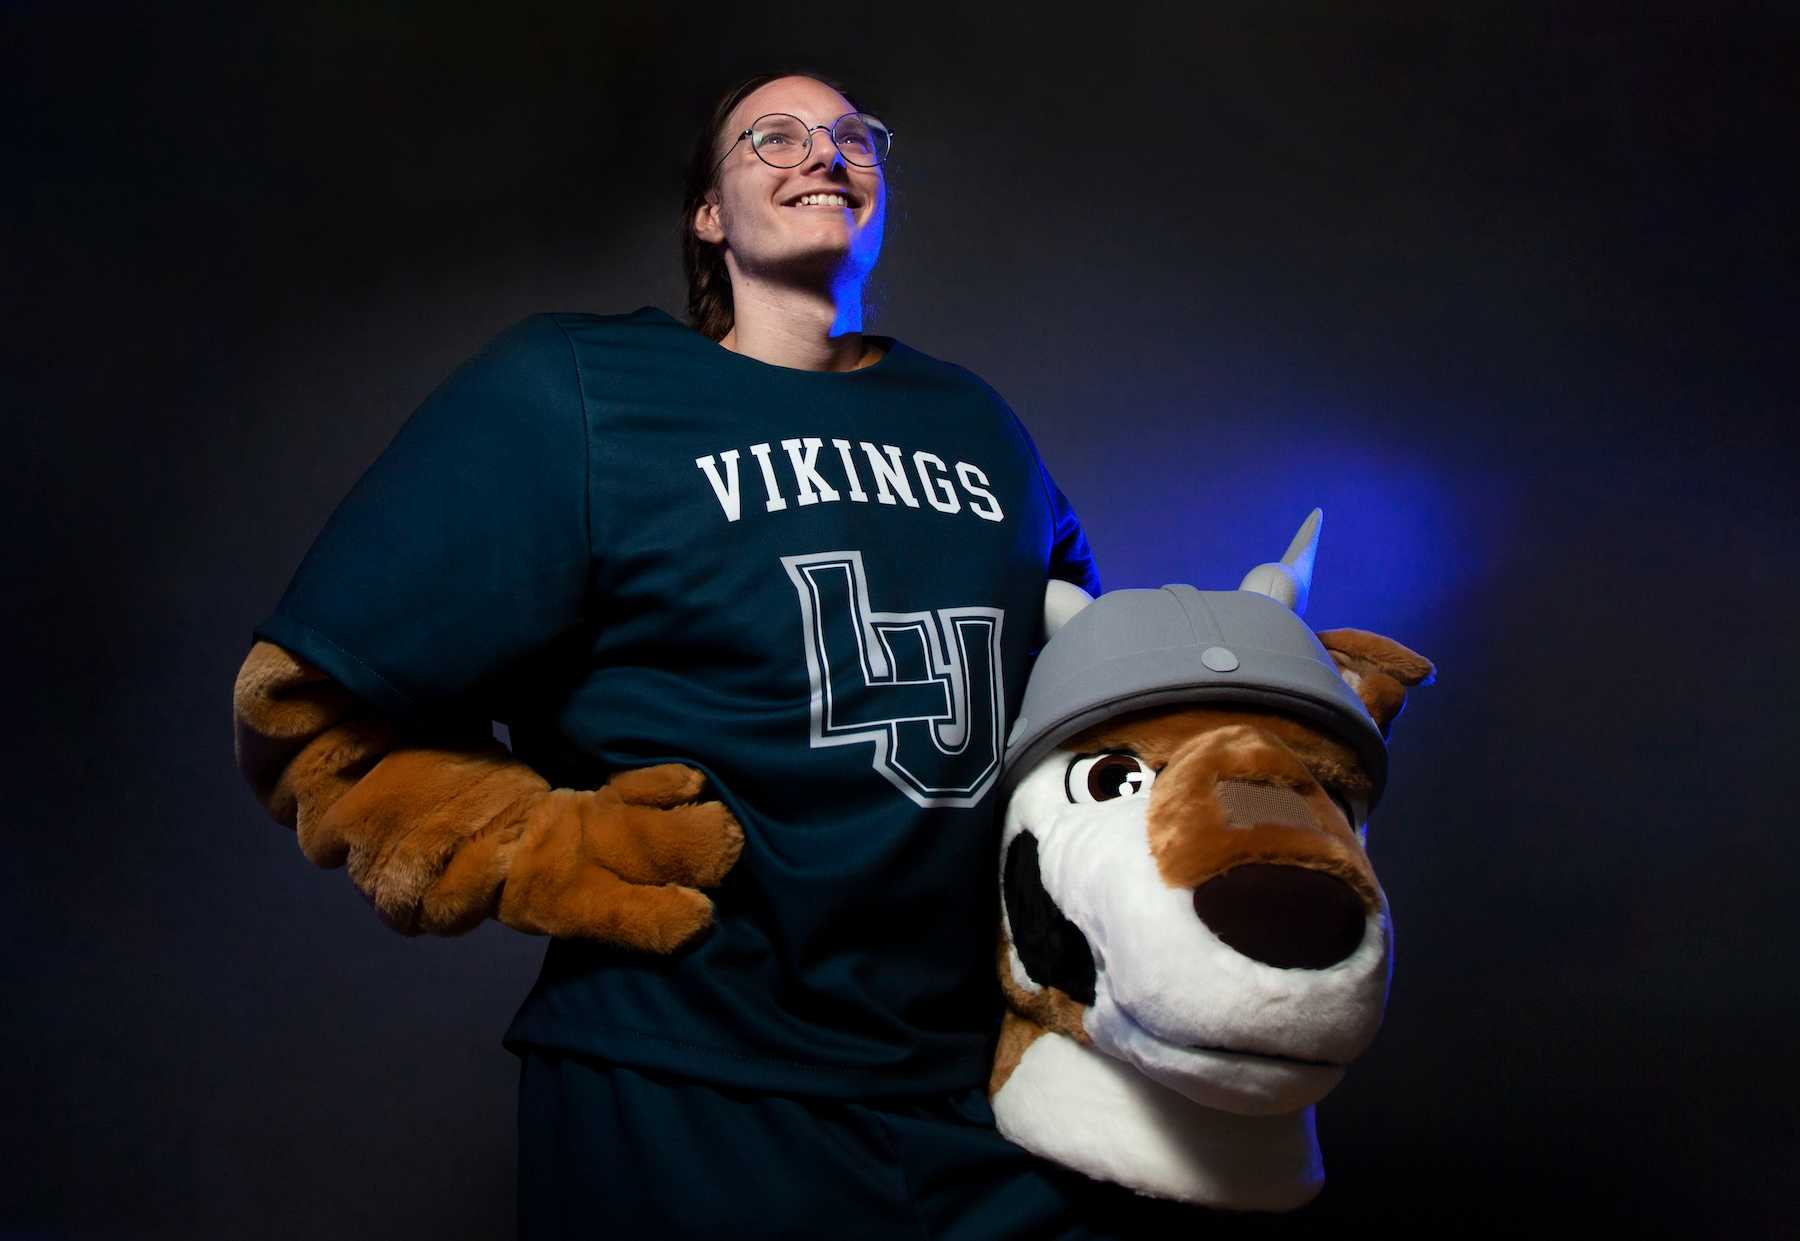 Spencer Brown poses for a photo bathed in blue light while holding the head of the Blu mascot.